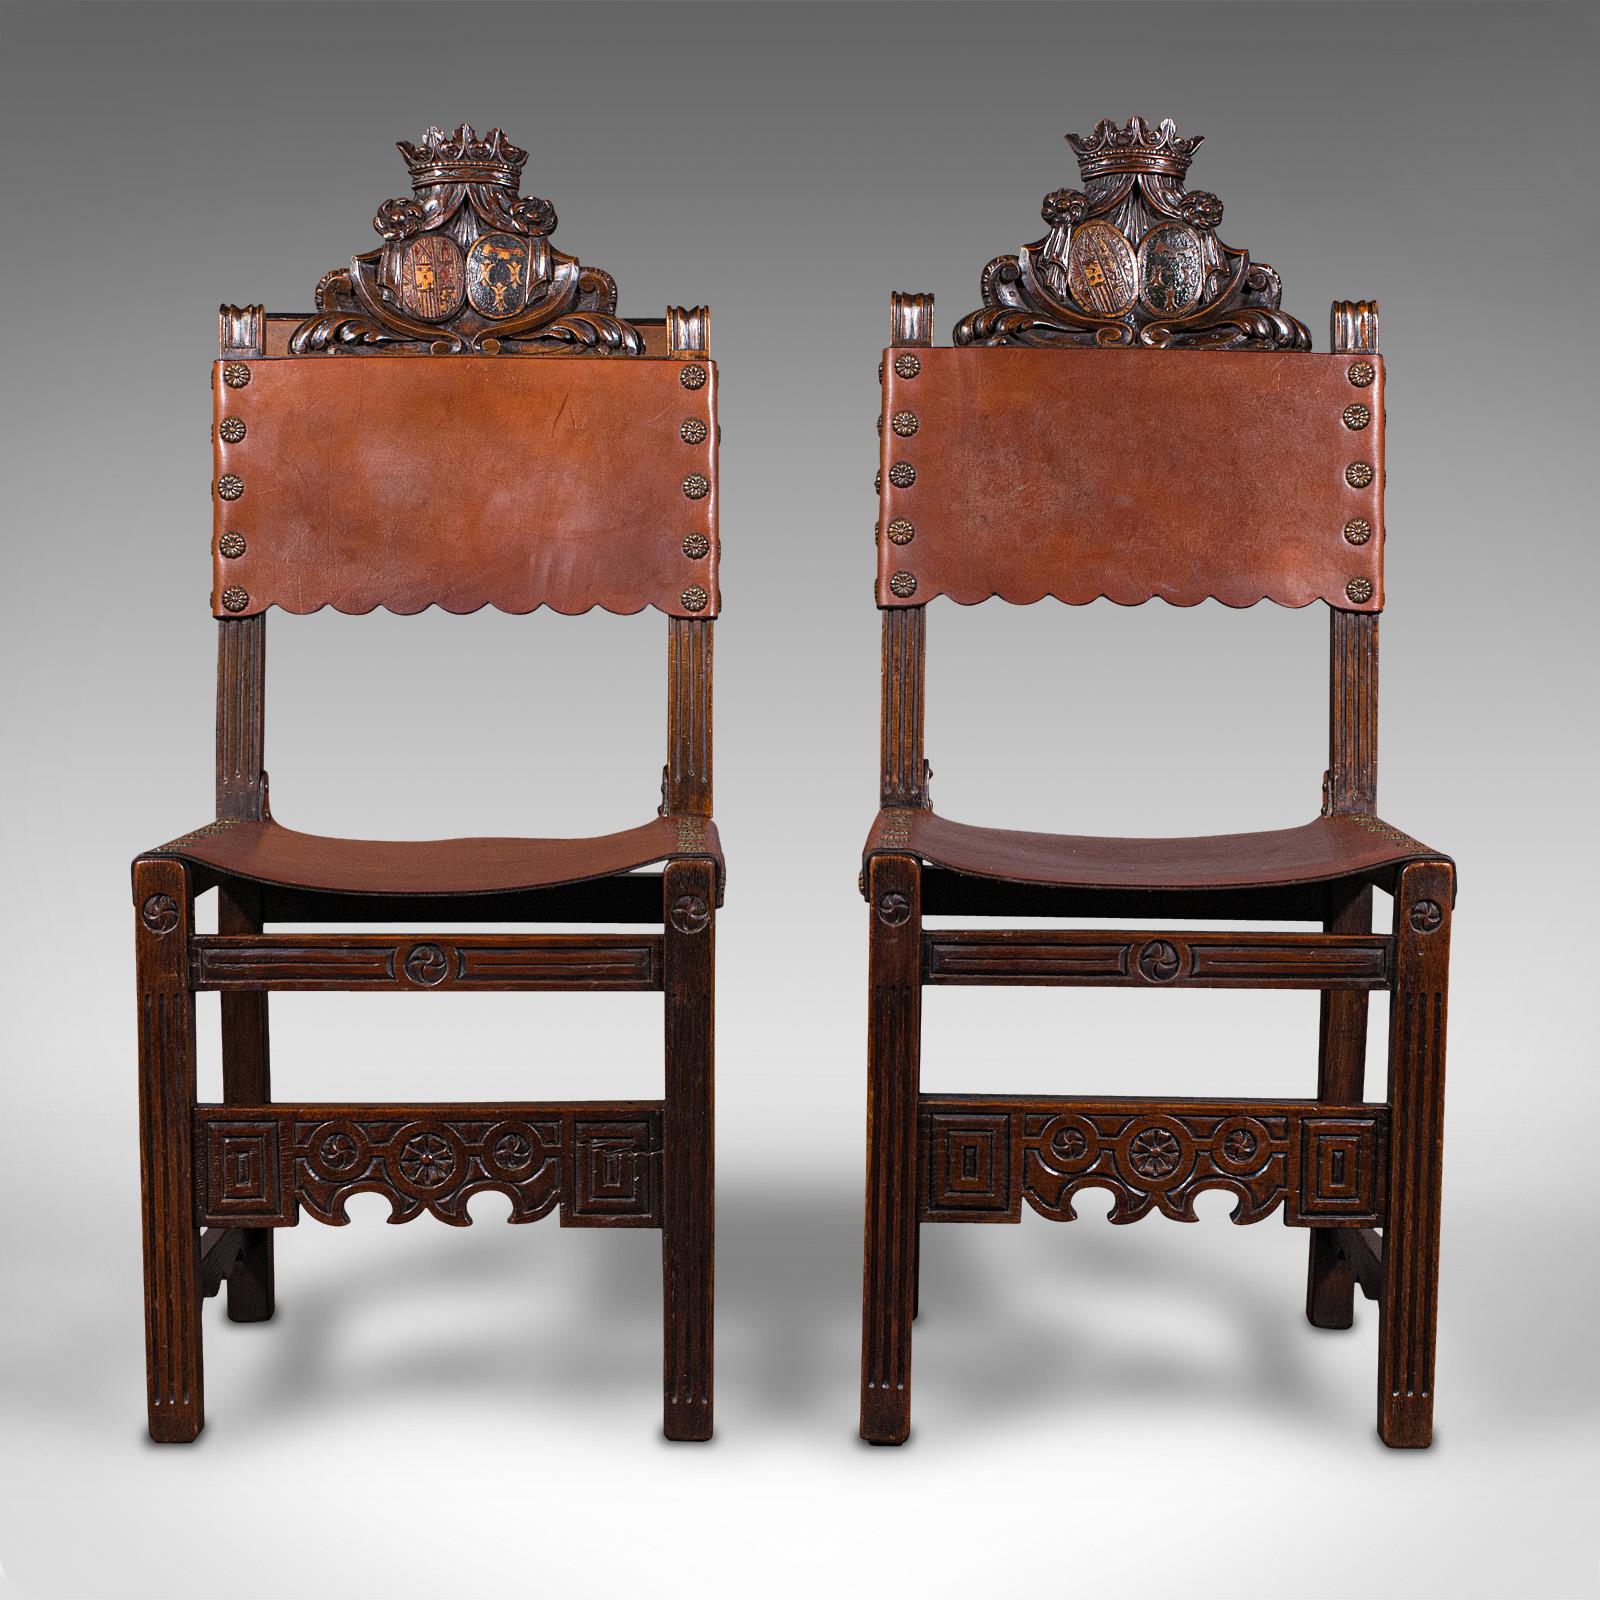 This is a pair of antique hall seats. A Scottish, dark stained pine side chair in Jacobean revival taste, dating to the Edwardian period, circa 1910.

Strong heraldic overtones with appealing colour
Displaying a desirable aged patina and in good